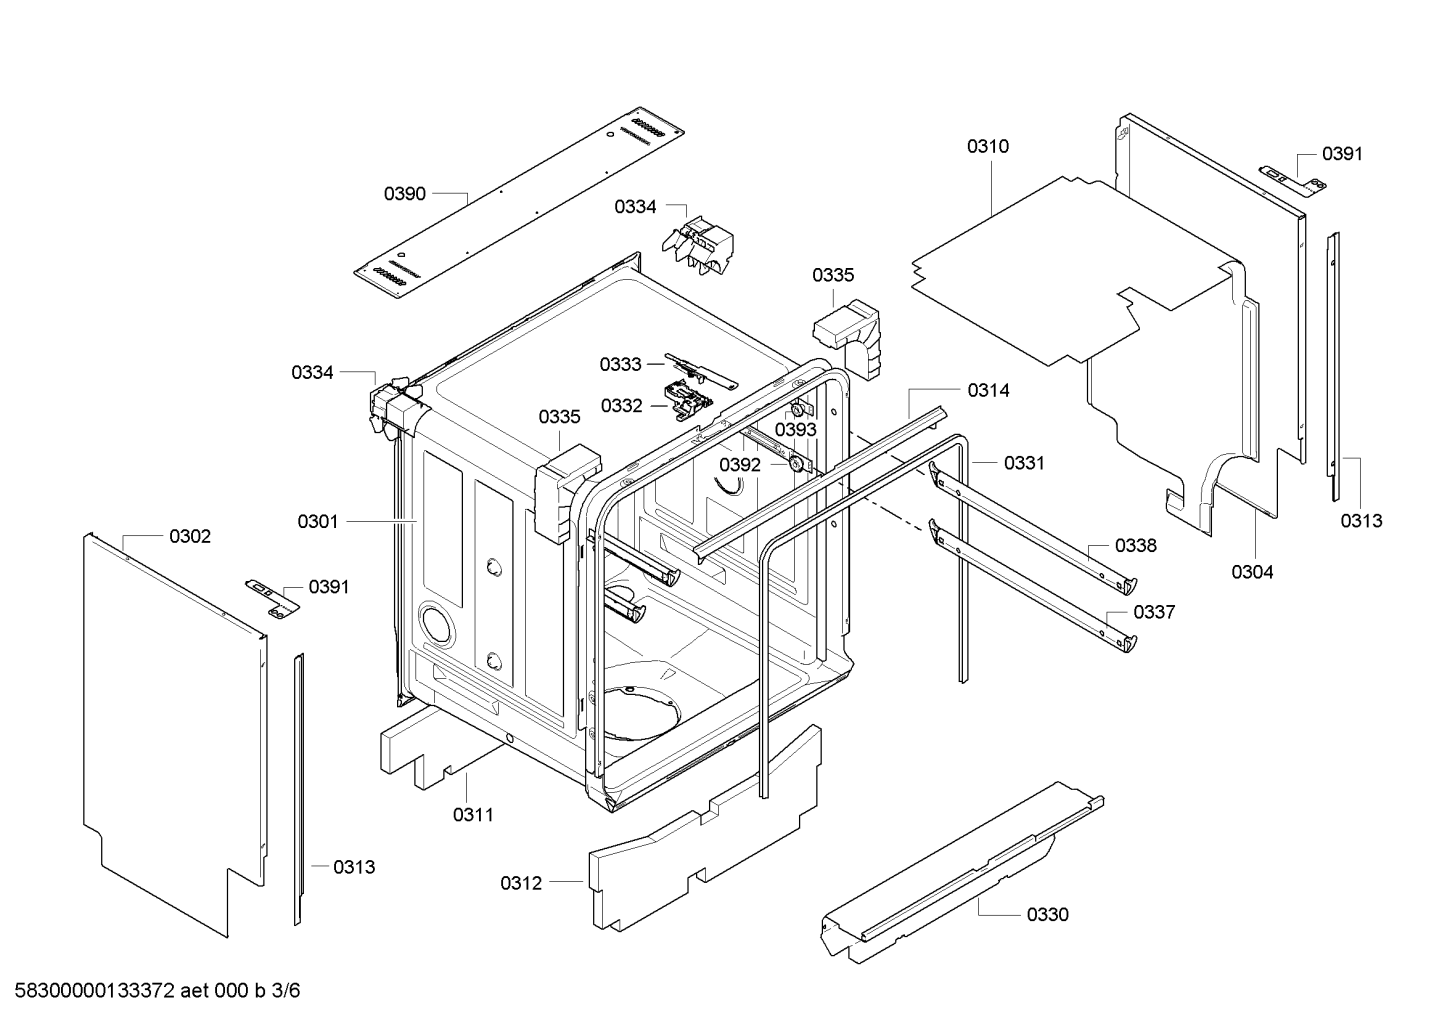 drawing_link_3_device_1568228